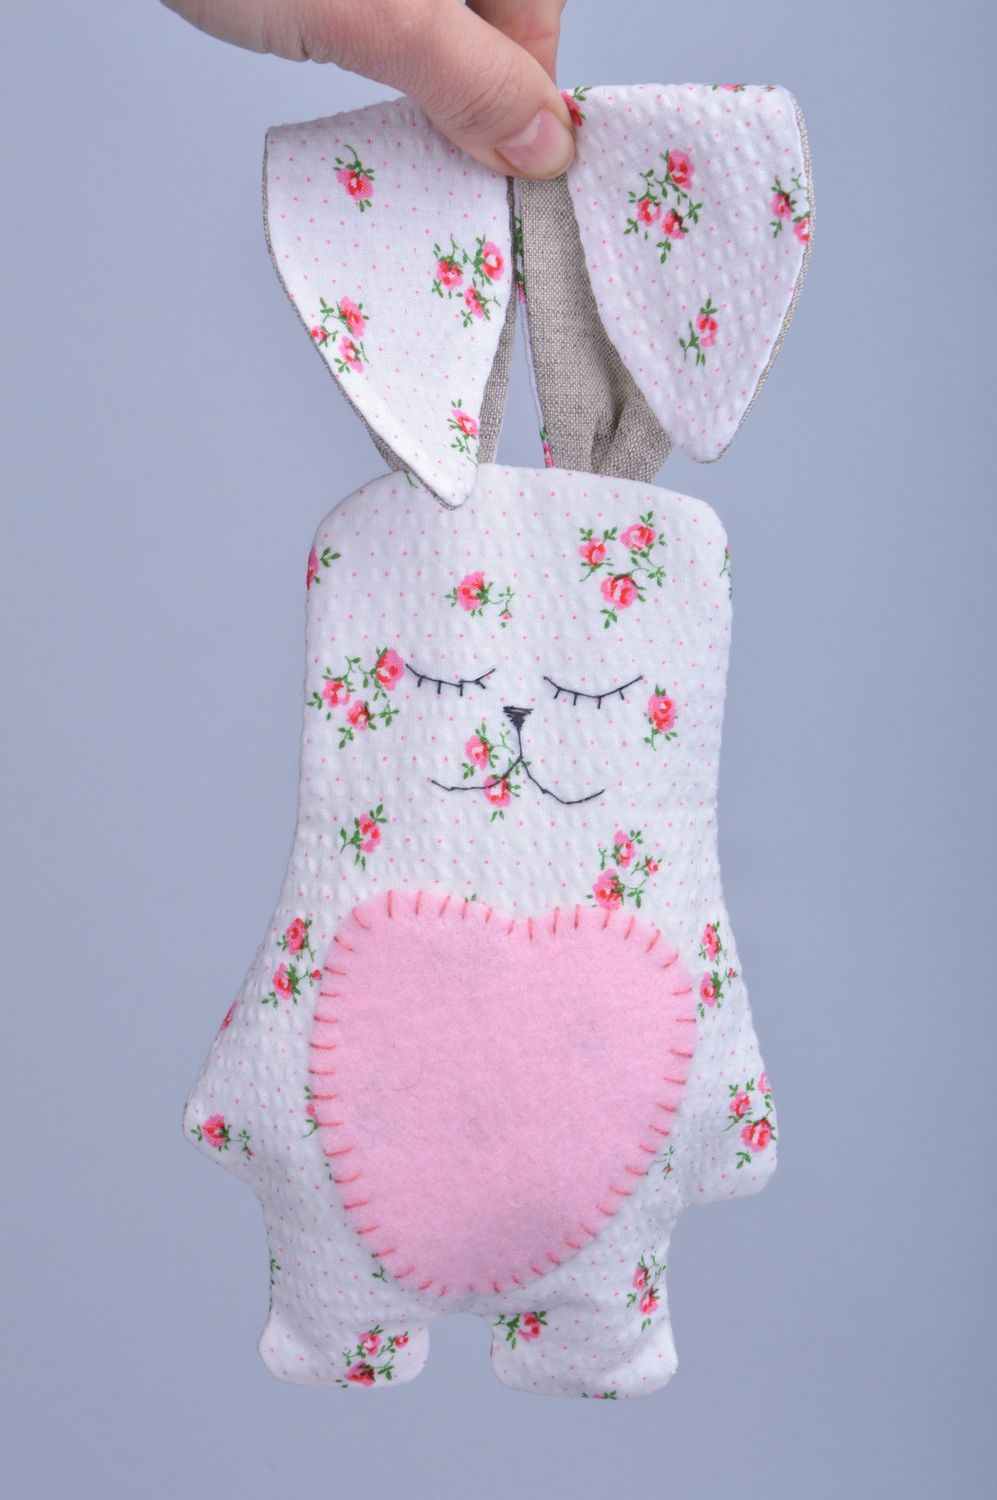 Handmade soft fabric heating pad toys with cherry pits Rabbits set of 2 items  photo 3